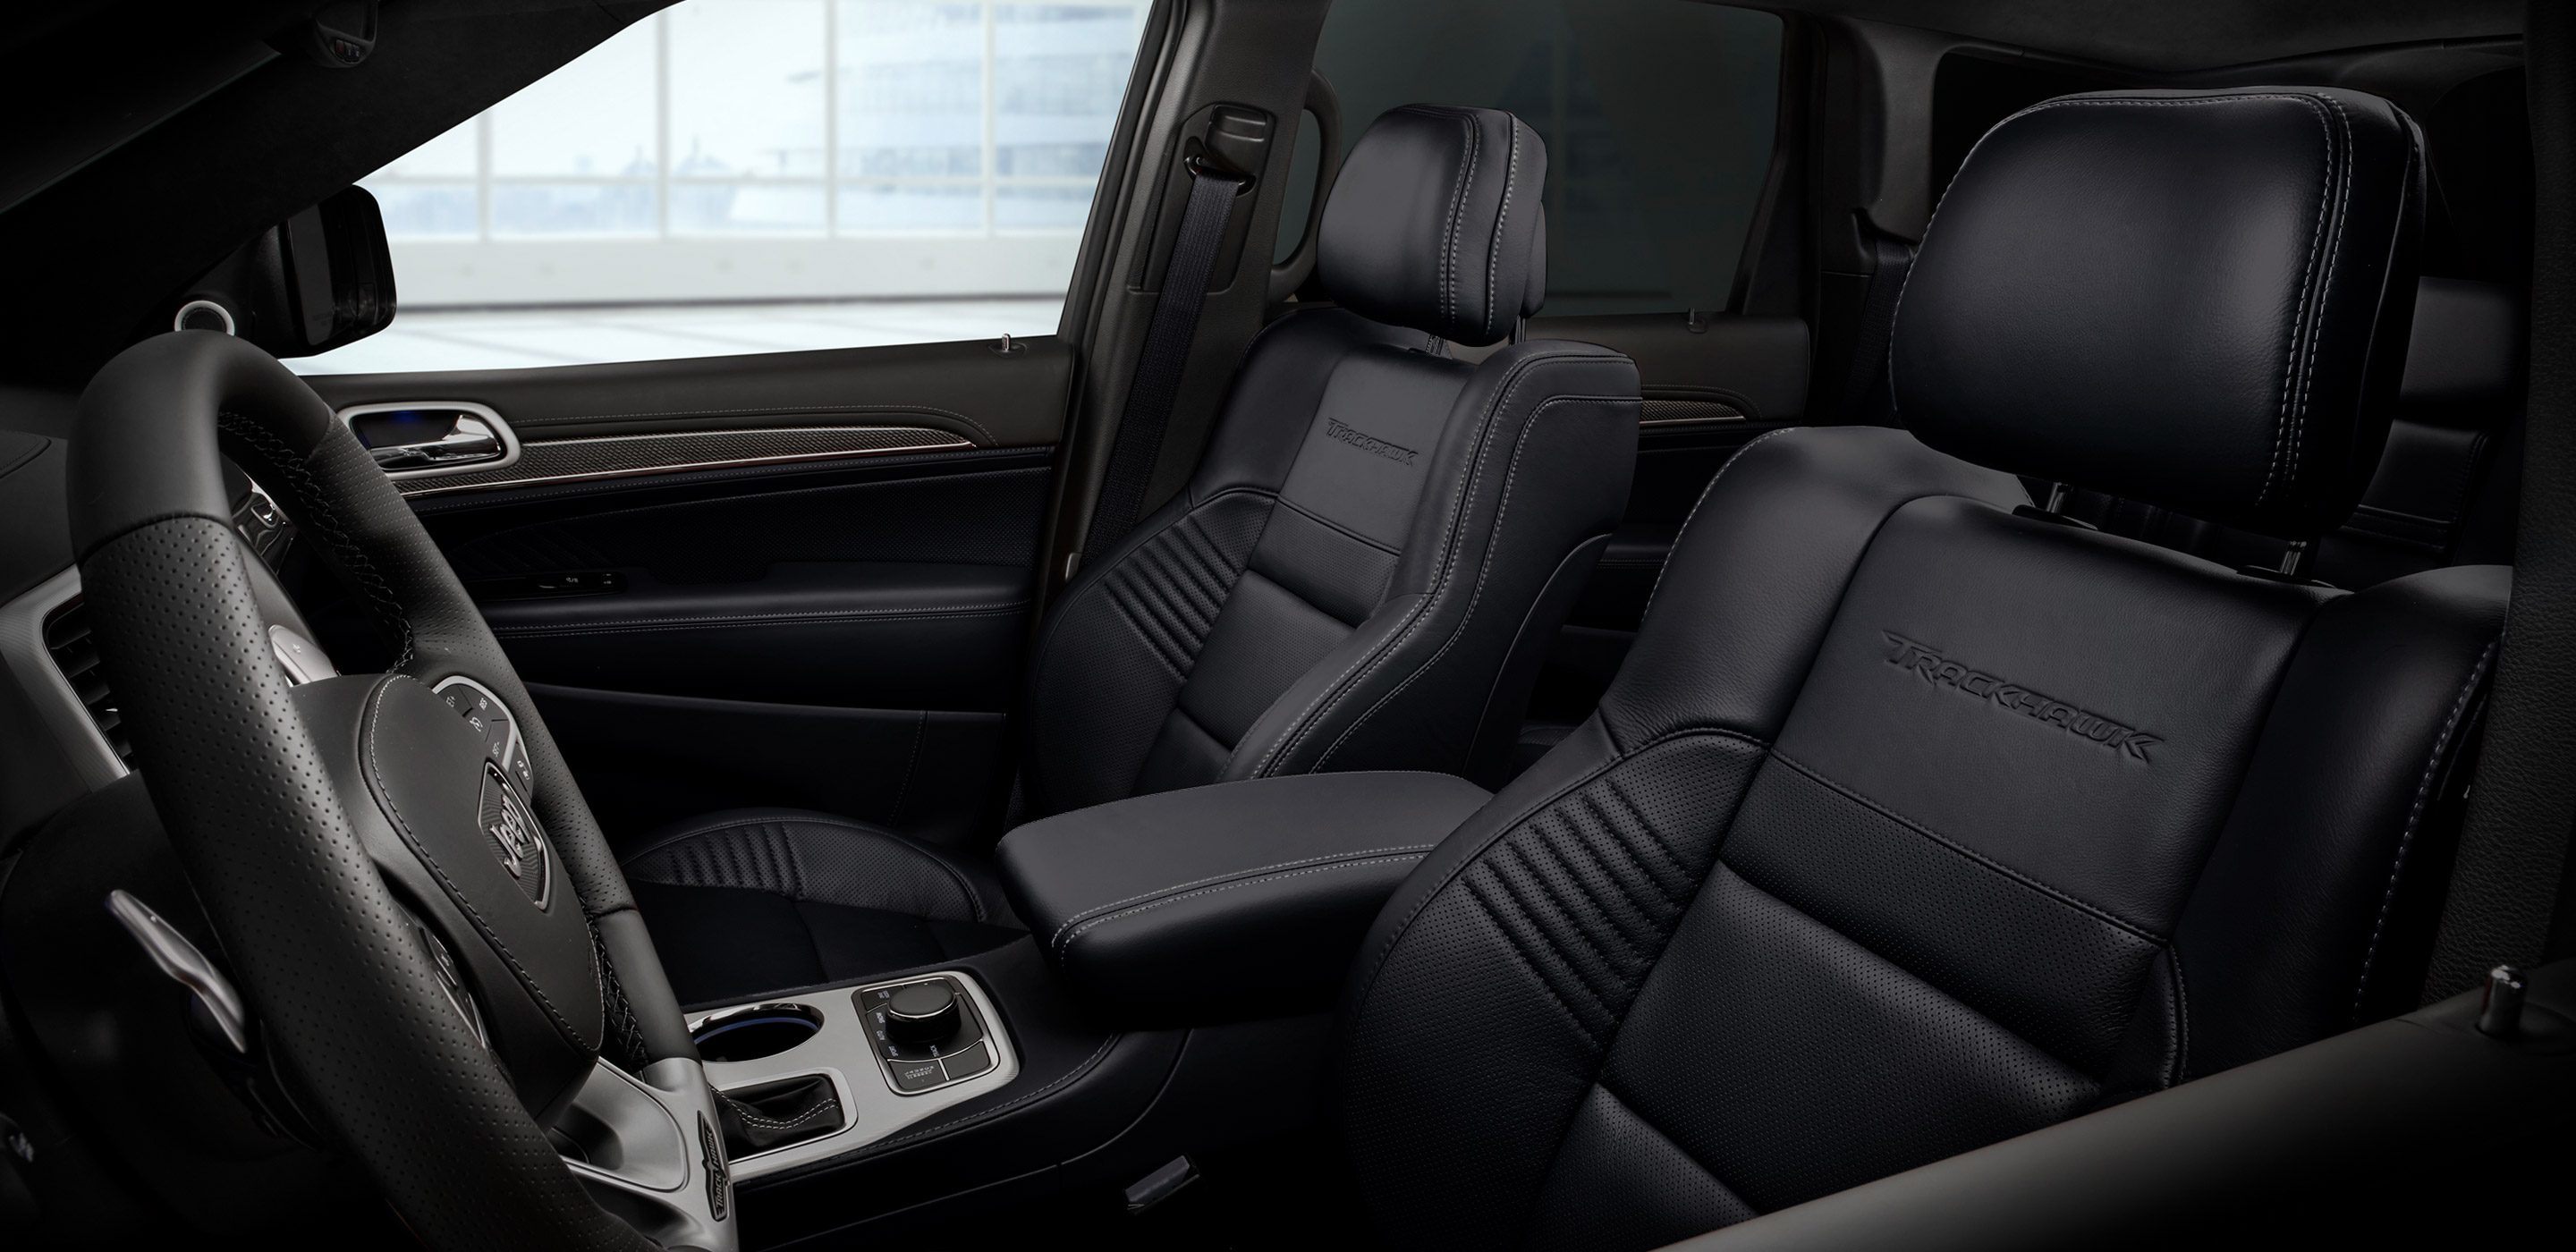 2018 Jeep Grand Cherokee SUV available black leather interior